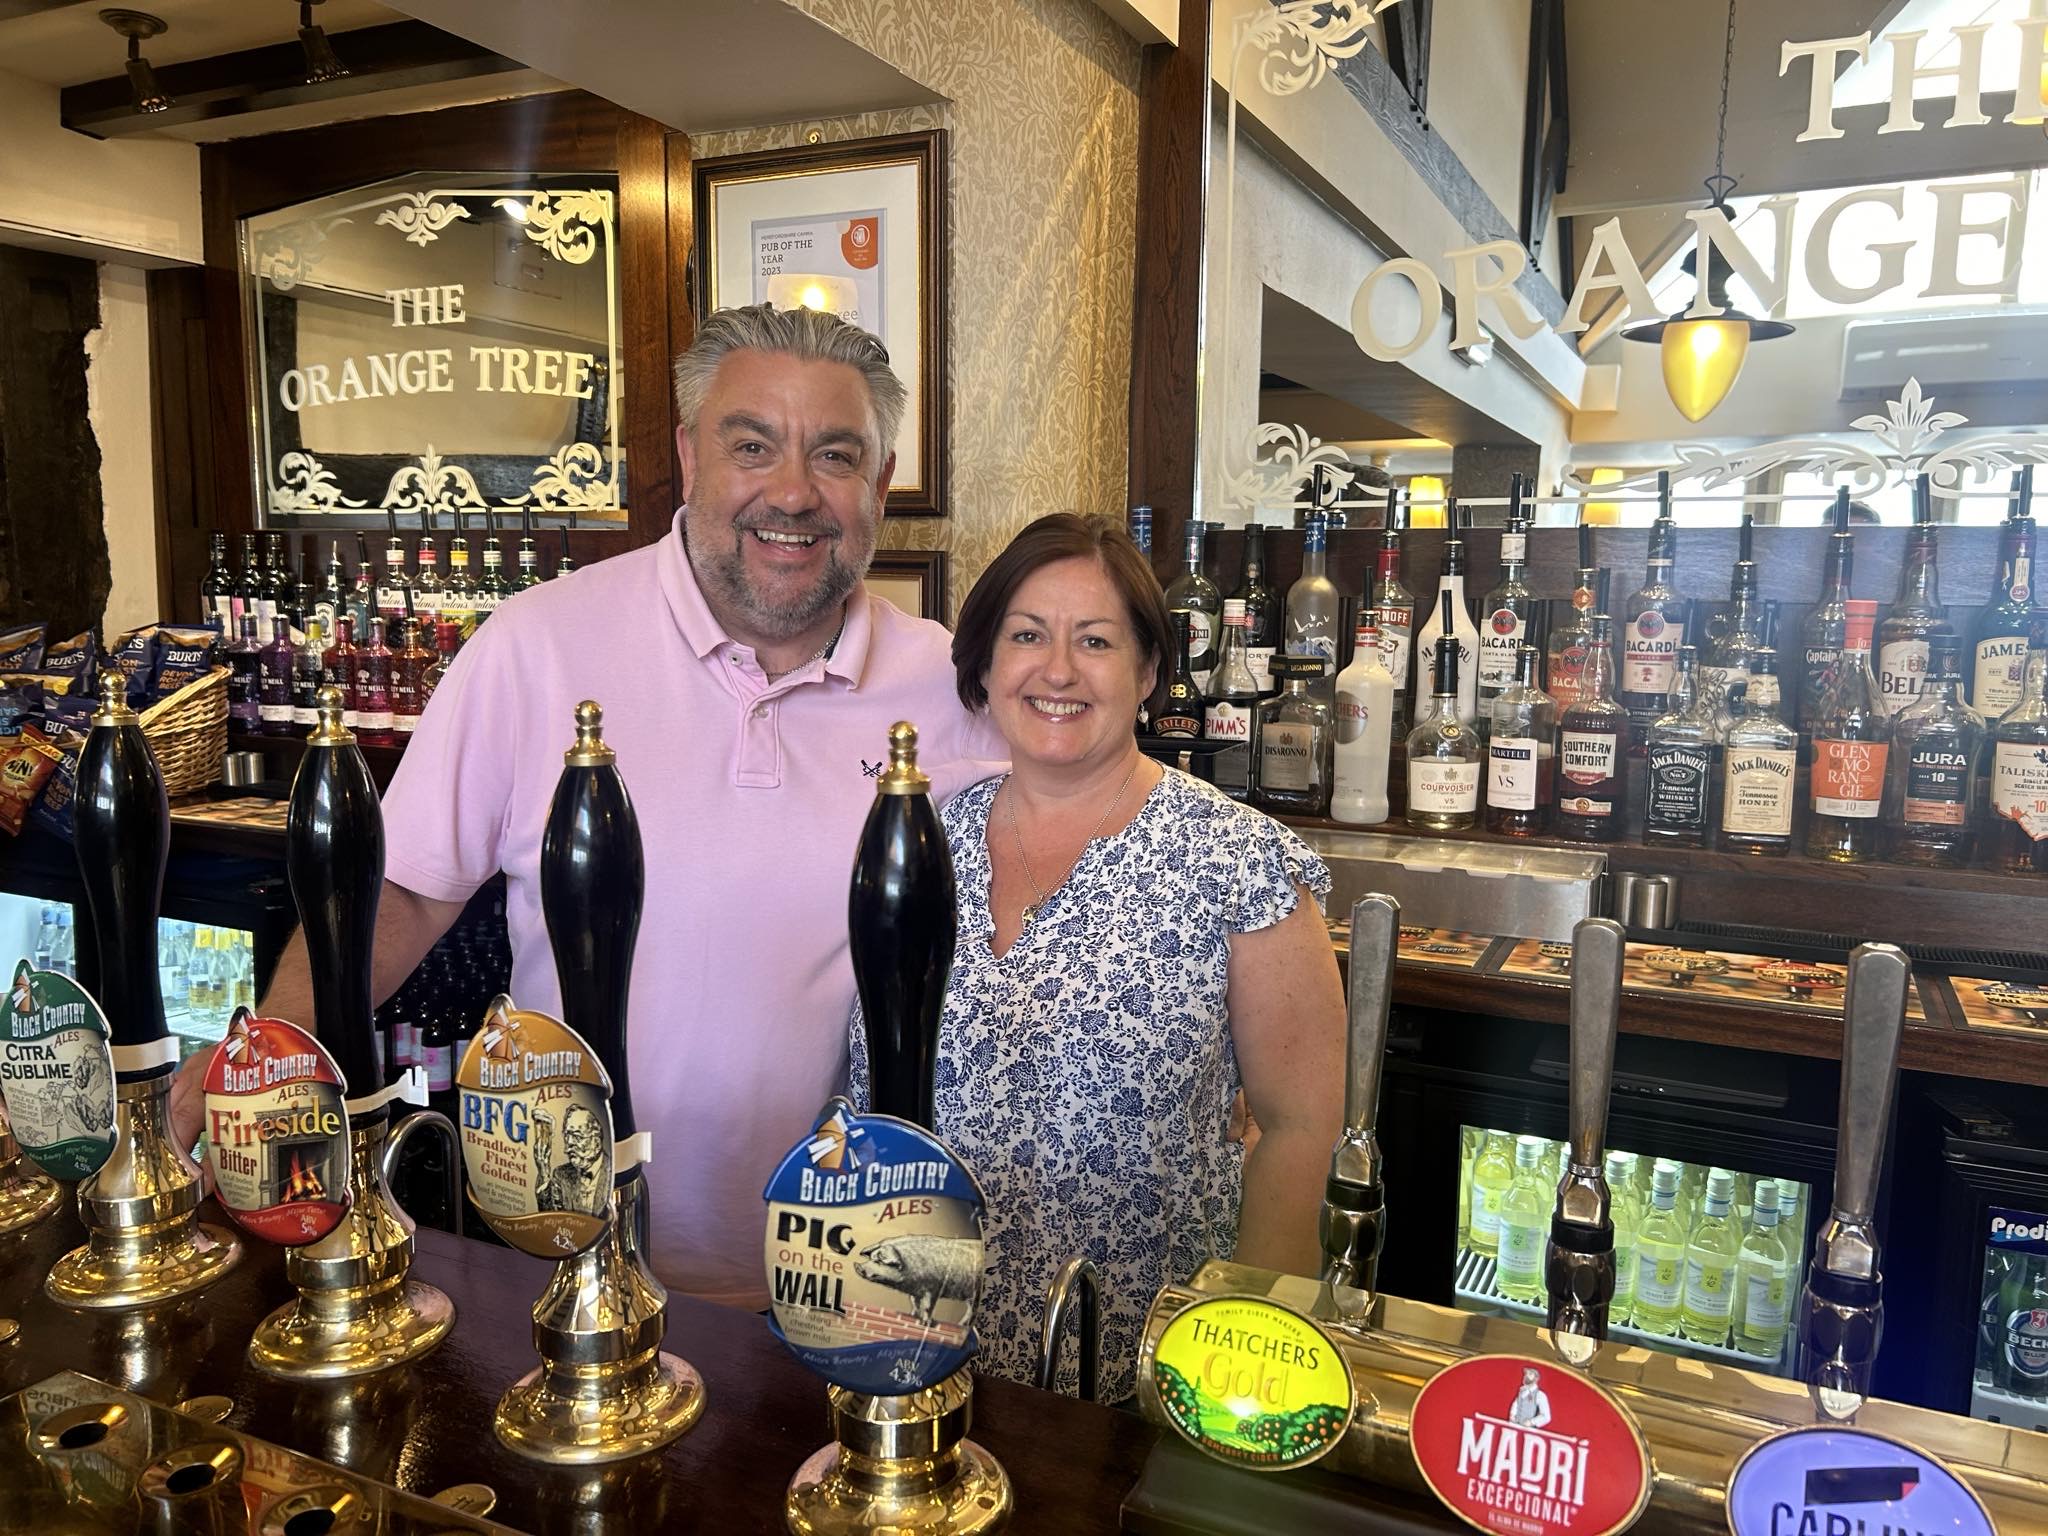 FEATURED | A Hereford pub has welcomed new landlords who hope to carry on the great work of the previous management team